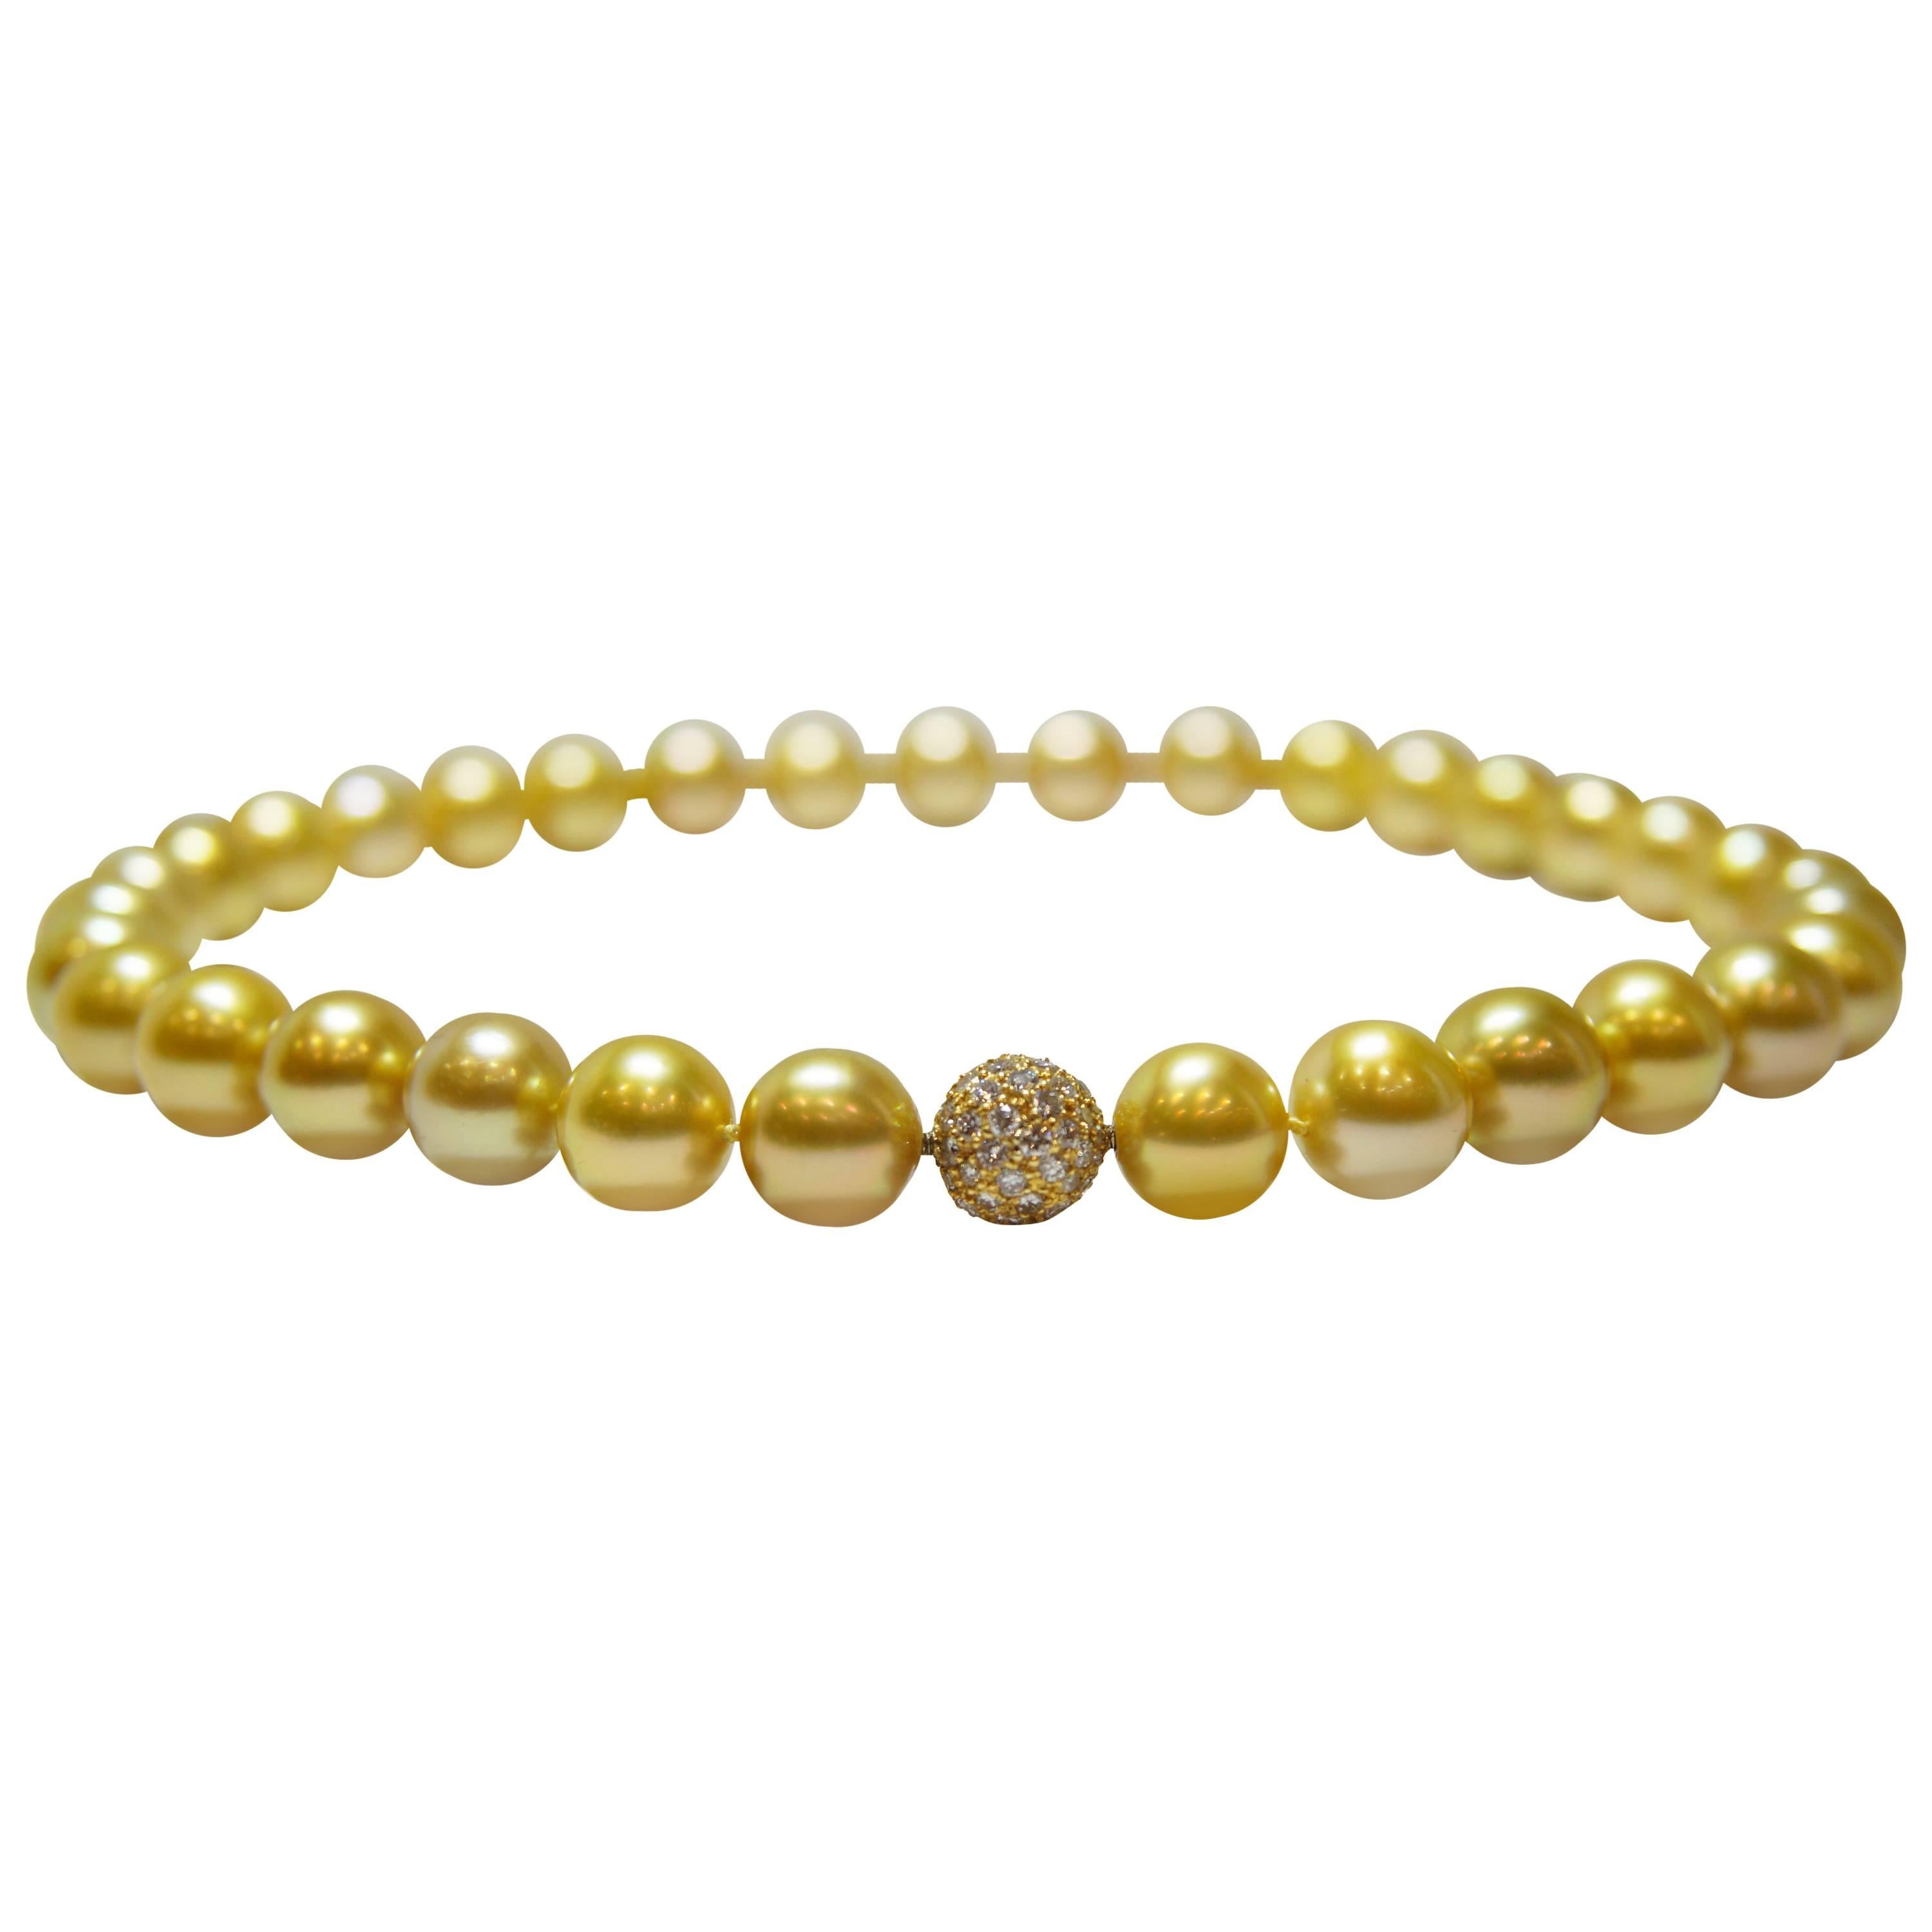 Golden South Sea Pearl Necklace For Sale